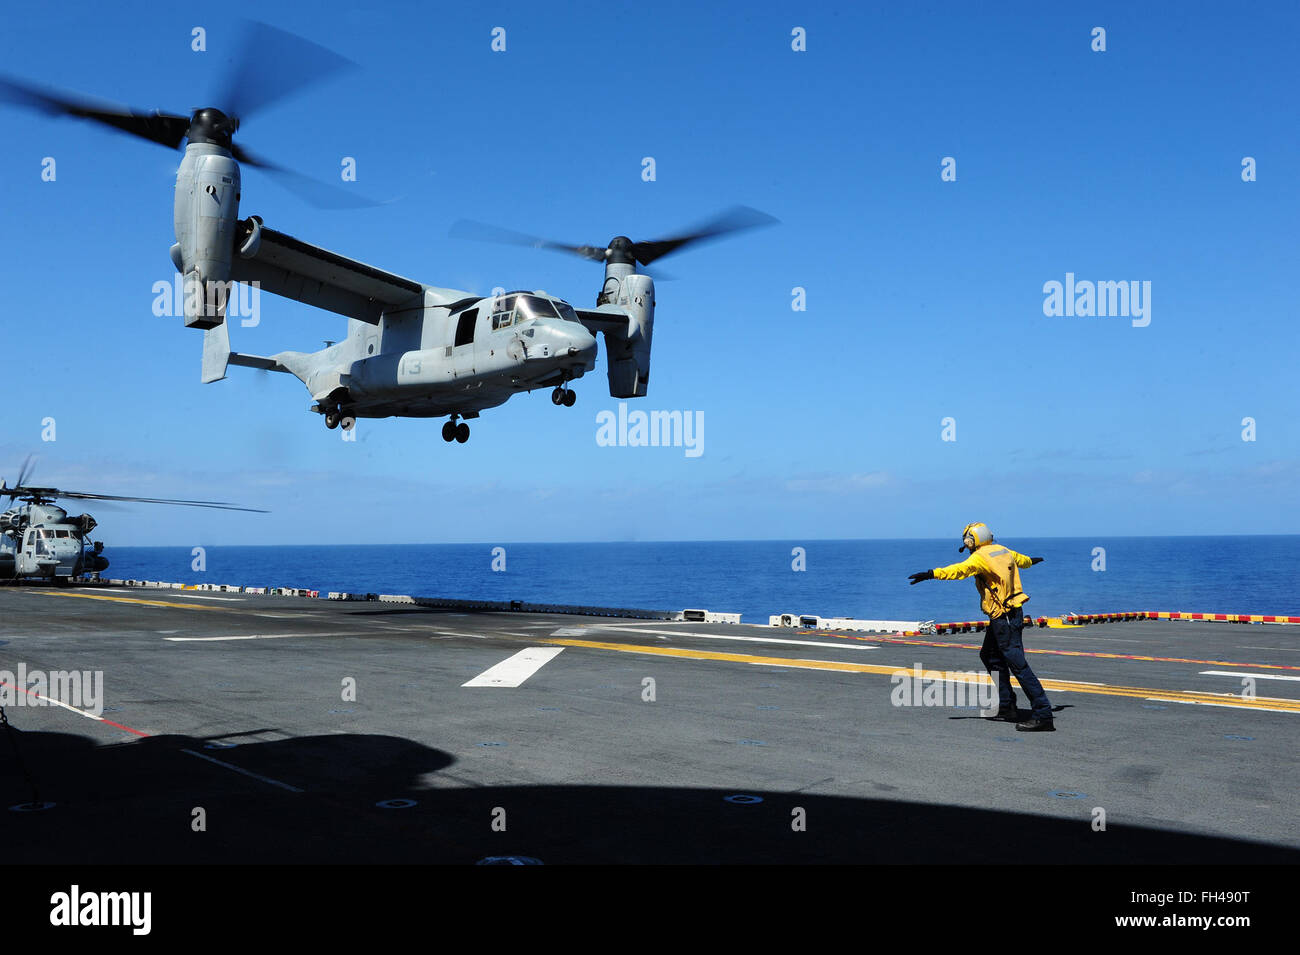 PACIFIC OCEAN (Feb. 22, 2016) Aviation Boatswain’s Mate (Handling) 3rd Class Demetri Cornett signals an MV-22 Osprey, assigned to Marine Medium Tilt Rotor Squadron (VMM) 166 (Reinforced), on the flight deck of amphibious assault ship USS Boxer (LHD 4). More than 4,500 Sailors and Marines from Boxer Amphibious Ready Group and the 13th Marine Expeditionary Unit (13th MEU) are conducting sustainment training off the coast of Hawaii in preparation for entering the U.S. 5th and 7th Fleet areas of operations. Stock Photo